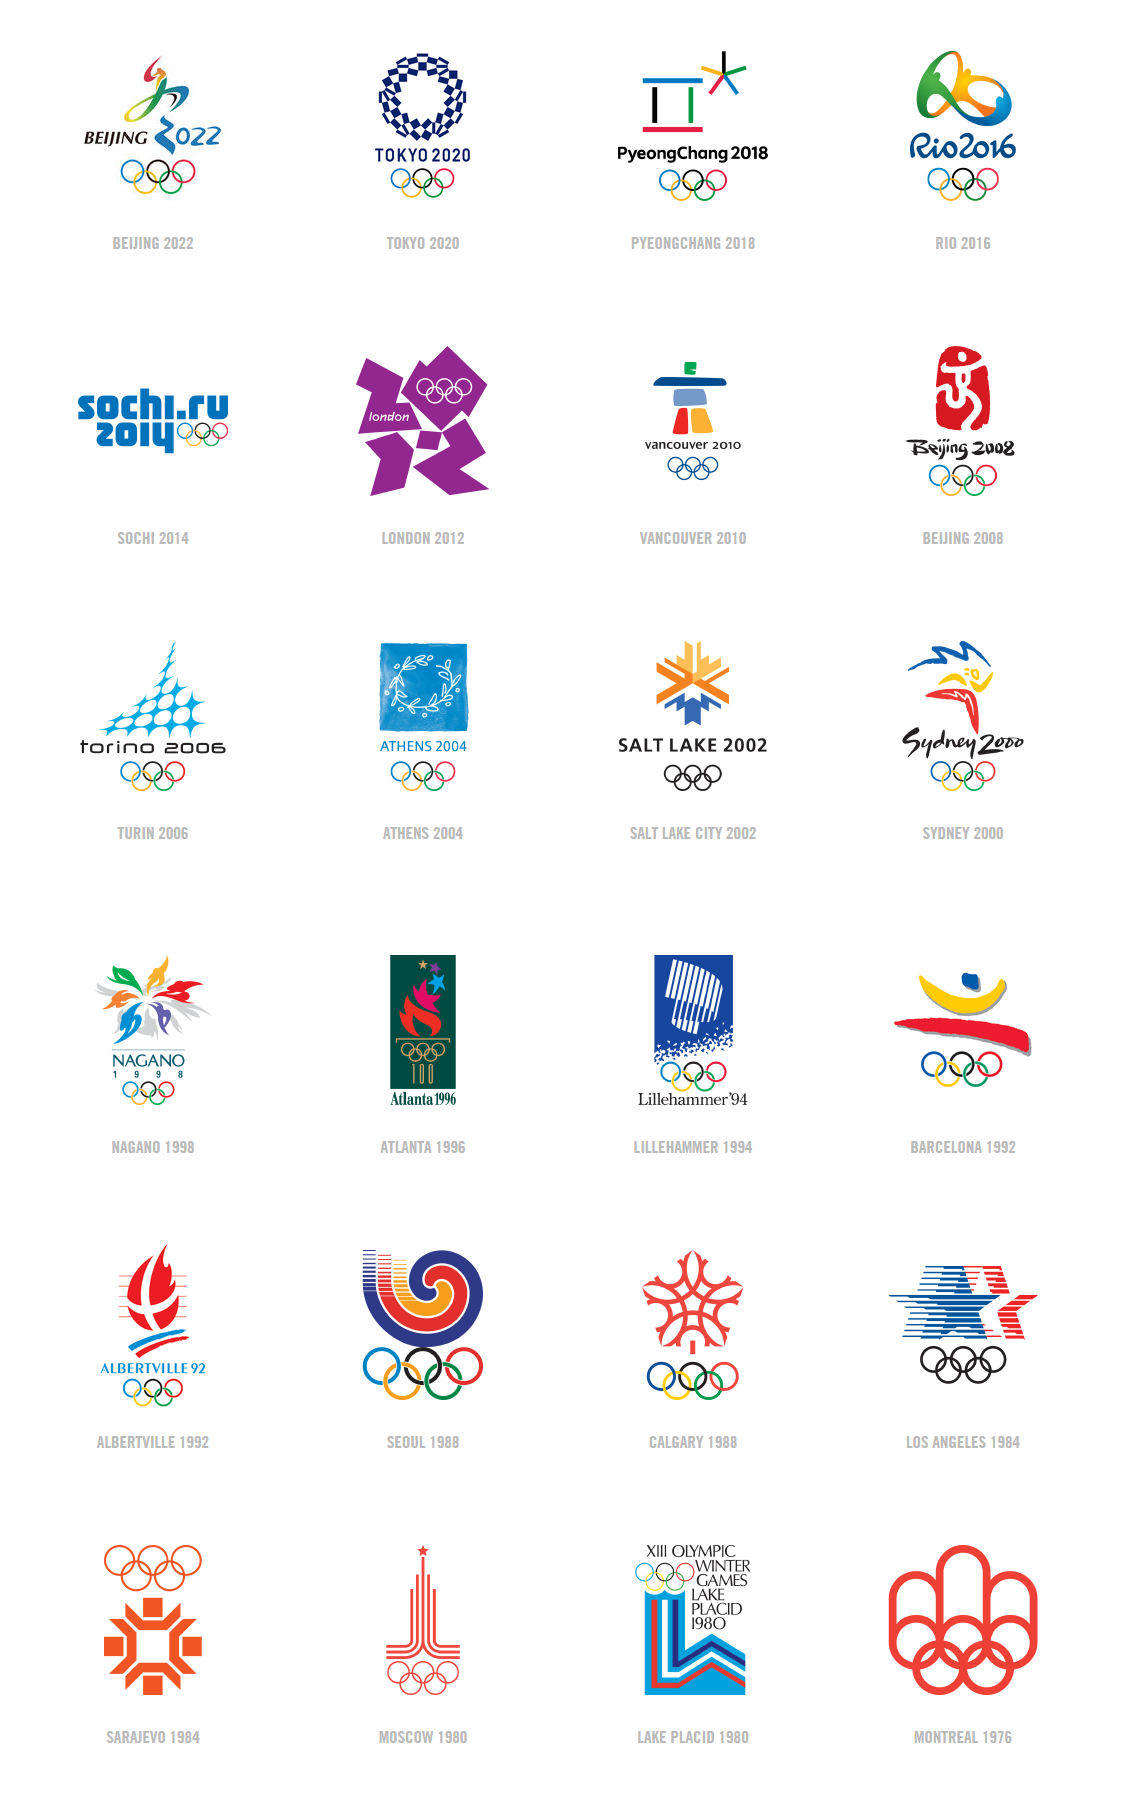 Which Olympic Games logo(s) 1976-2022 do you like best?